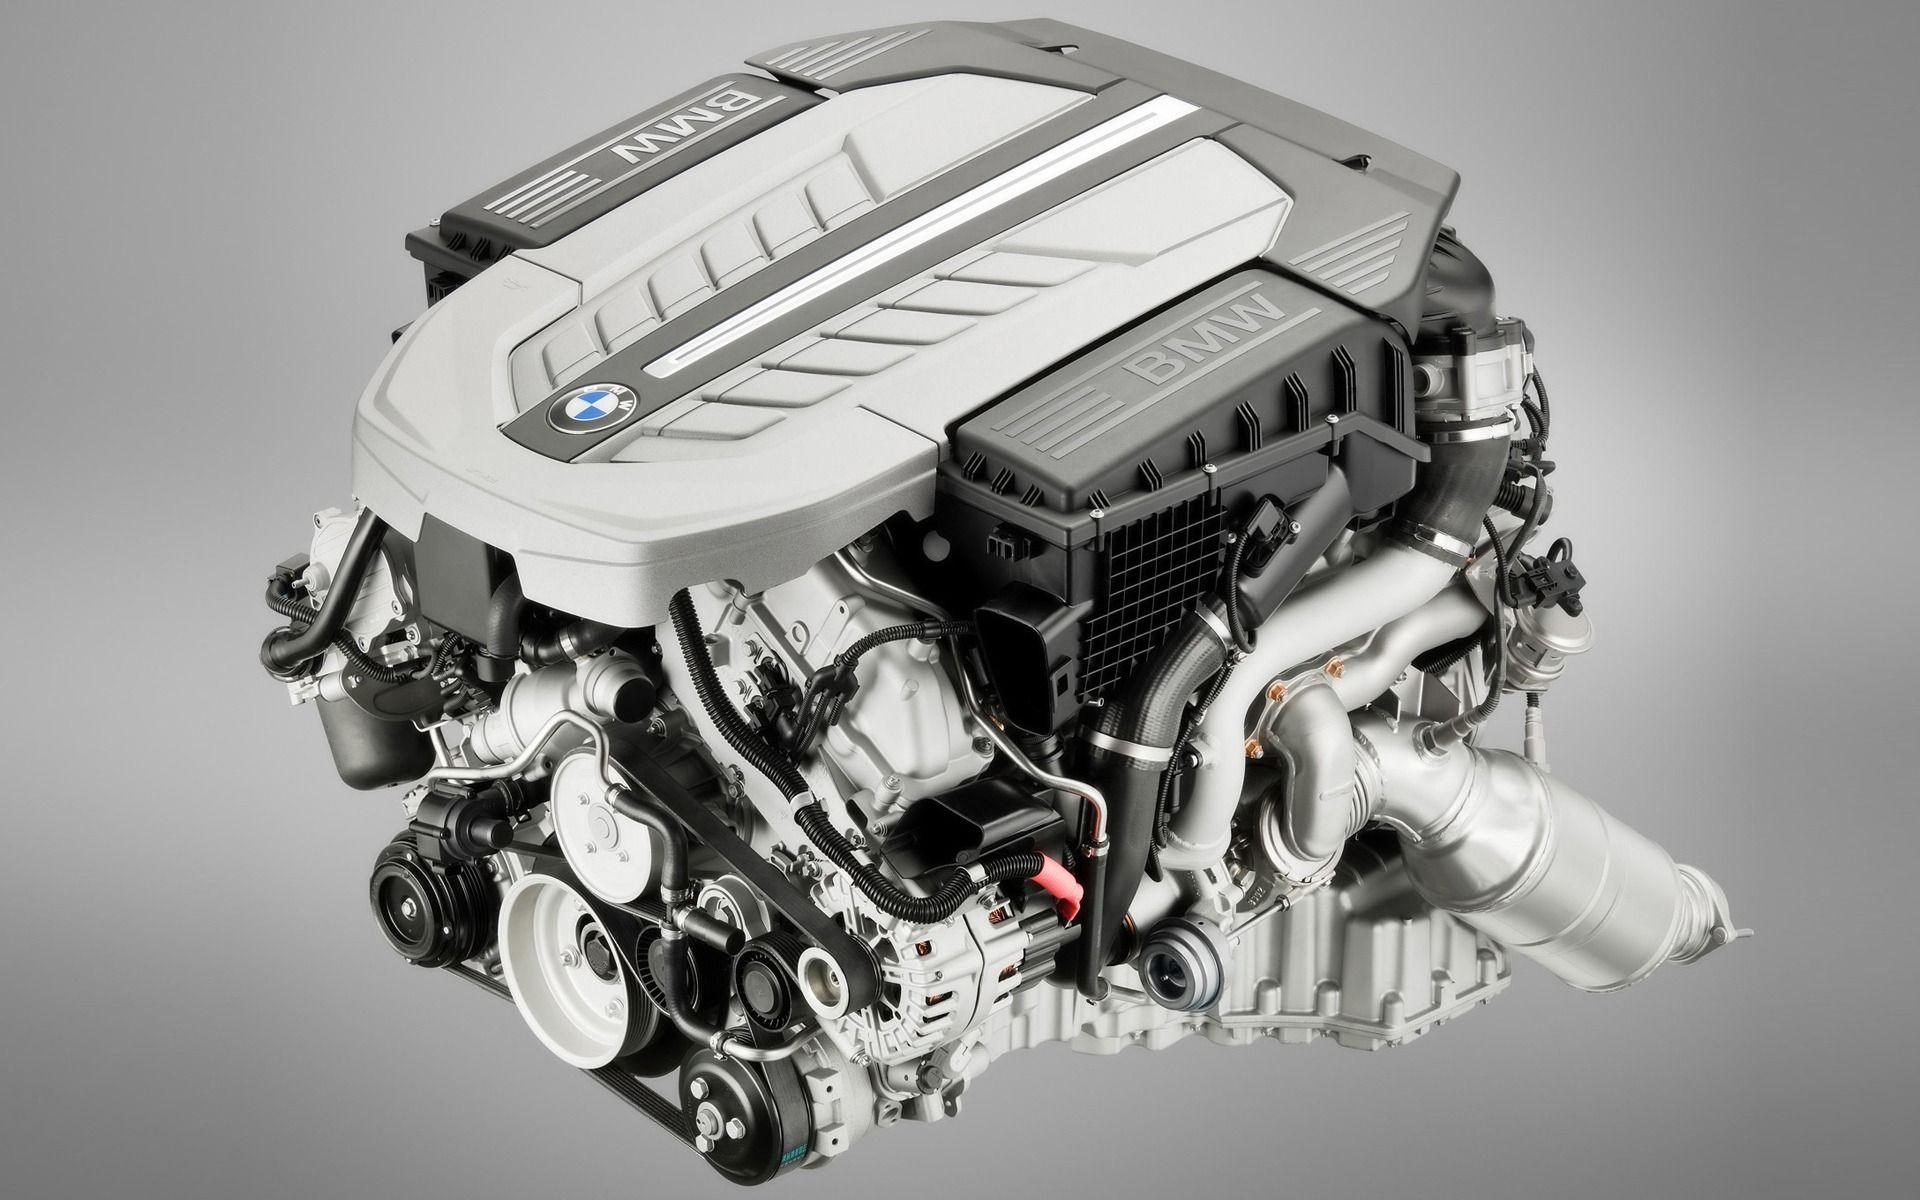 BMW Engine Wallpaper BMW Cars Wallpaper in jpg format for free download